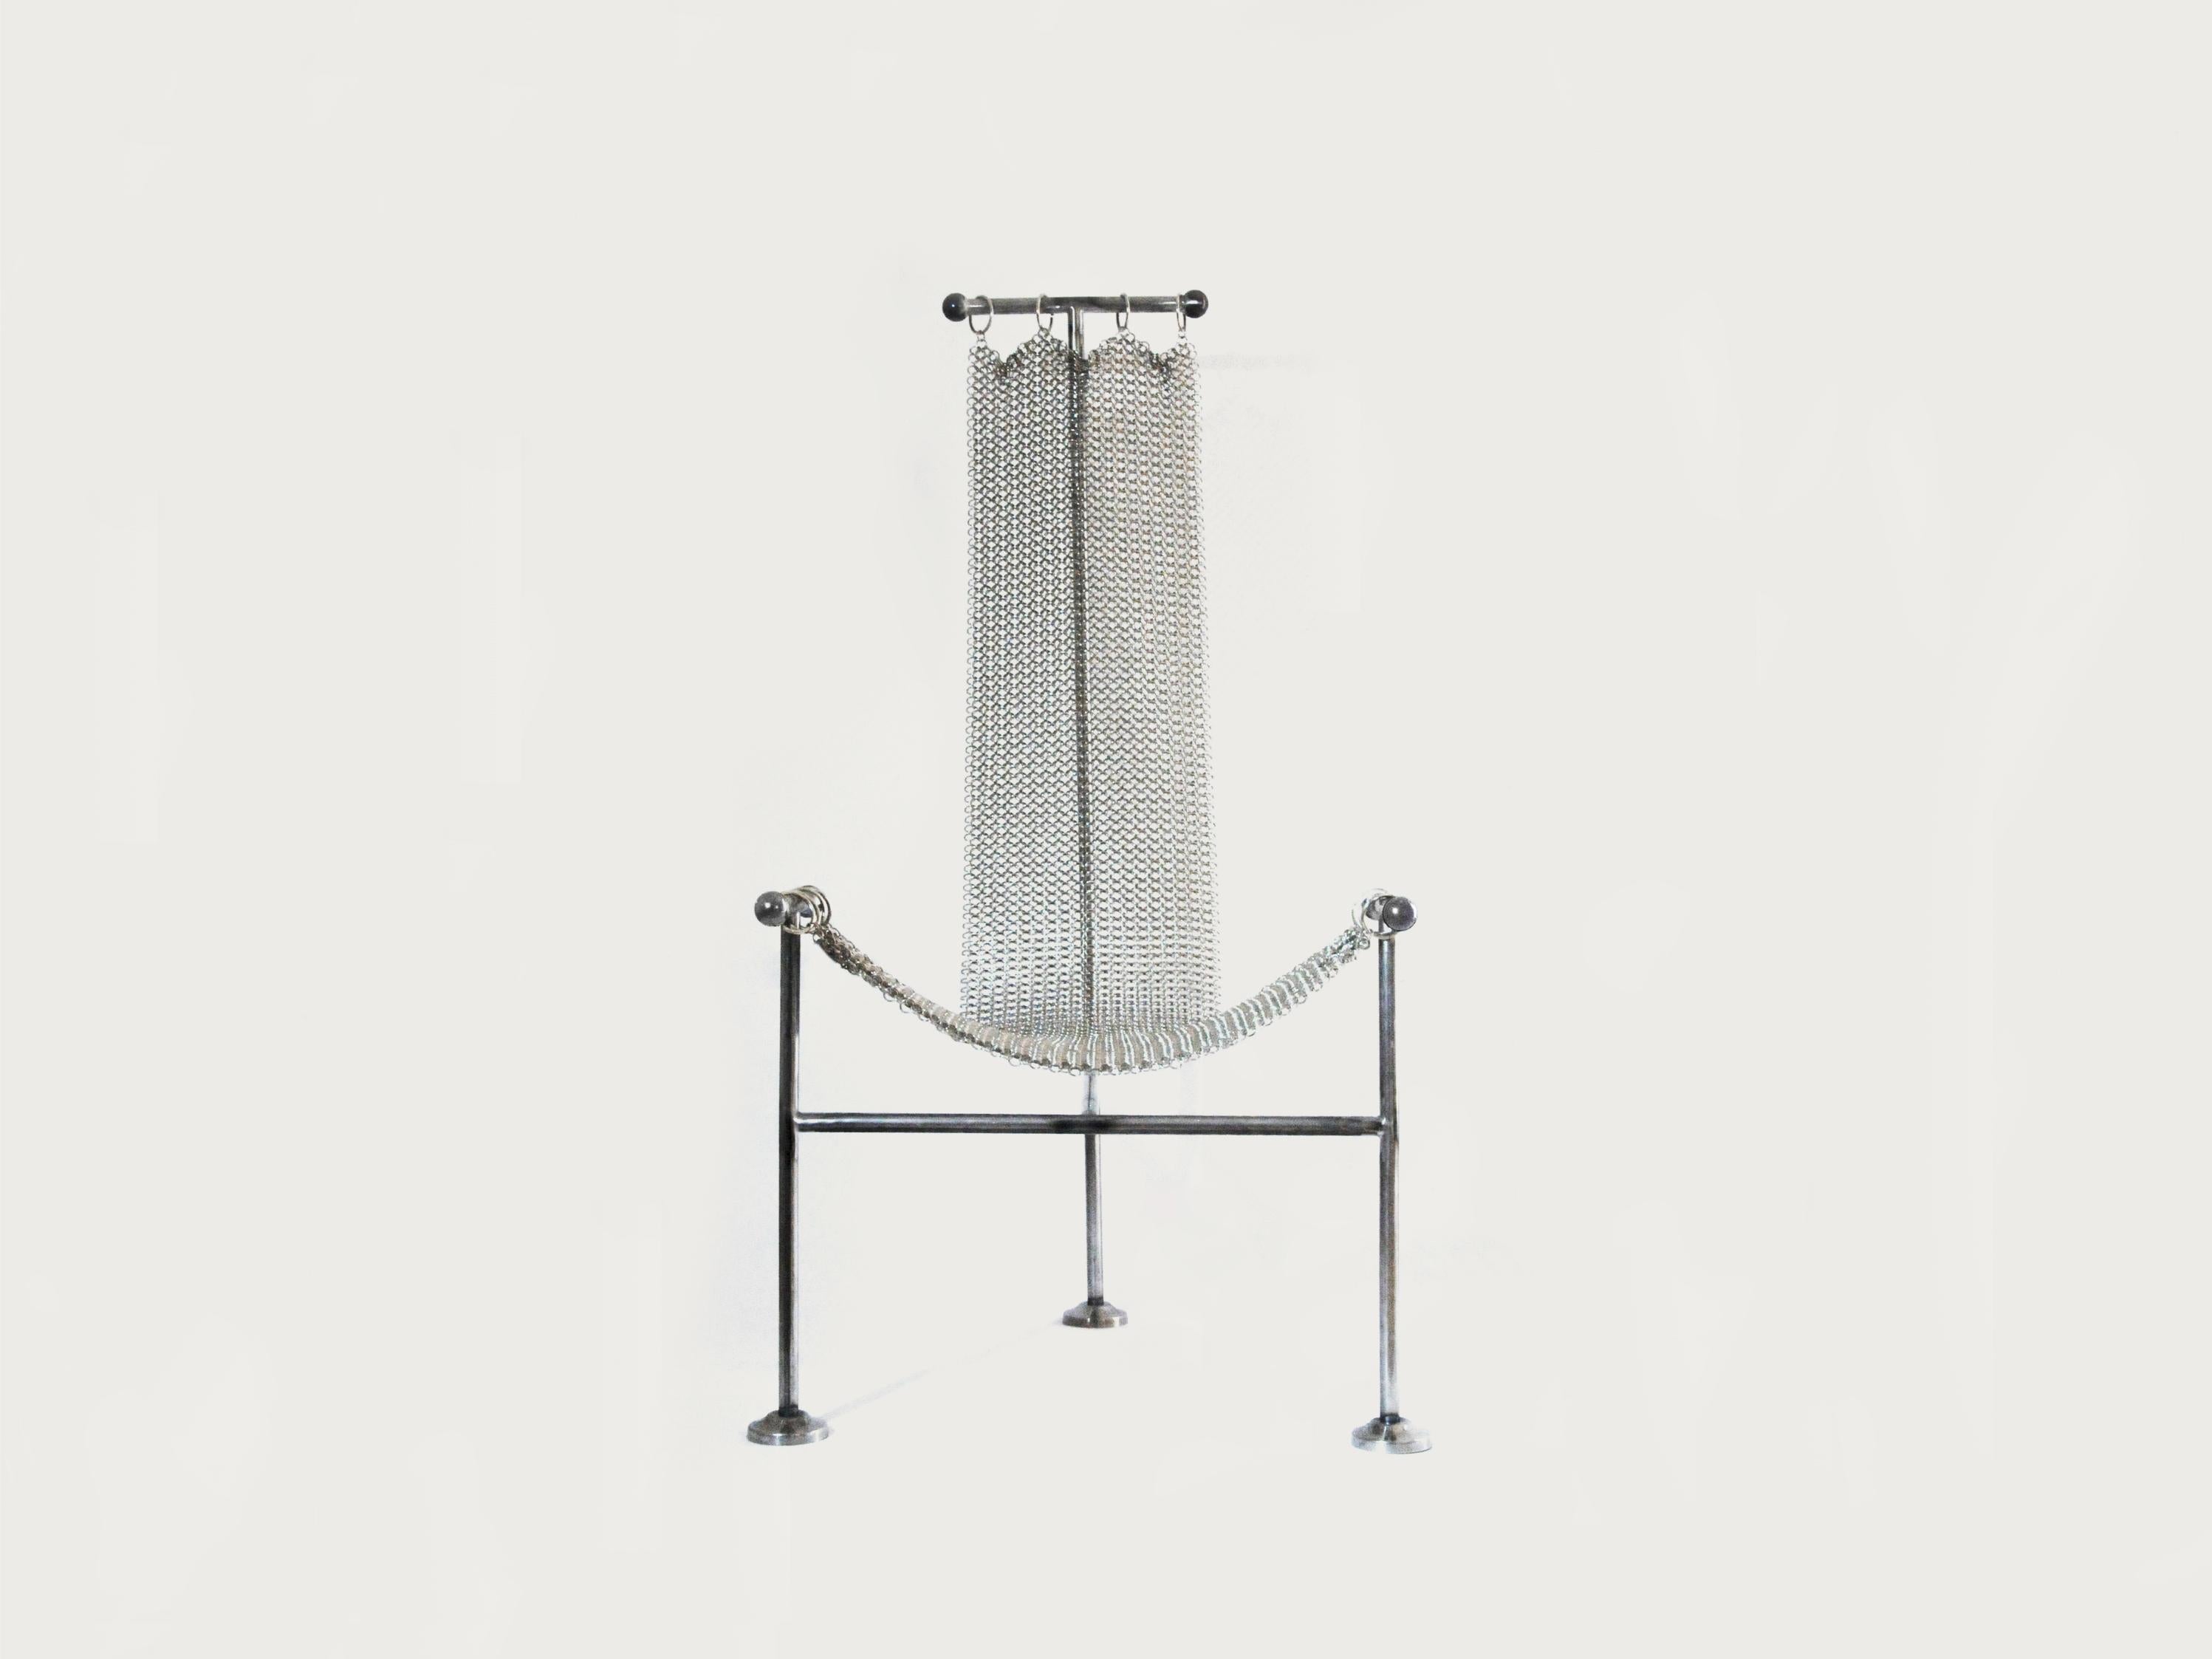 Chainmail chair by Panorammma
Materials: steel, nickel plating
Dimensions: 120 x 60 x 60 cm

Panorammma is a furniture design atelier based in Mexico City that seeks to redefine our relation to functional objects through experimentation with